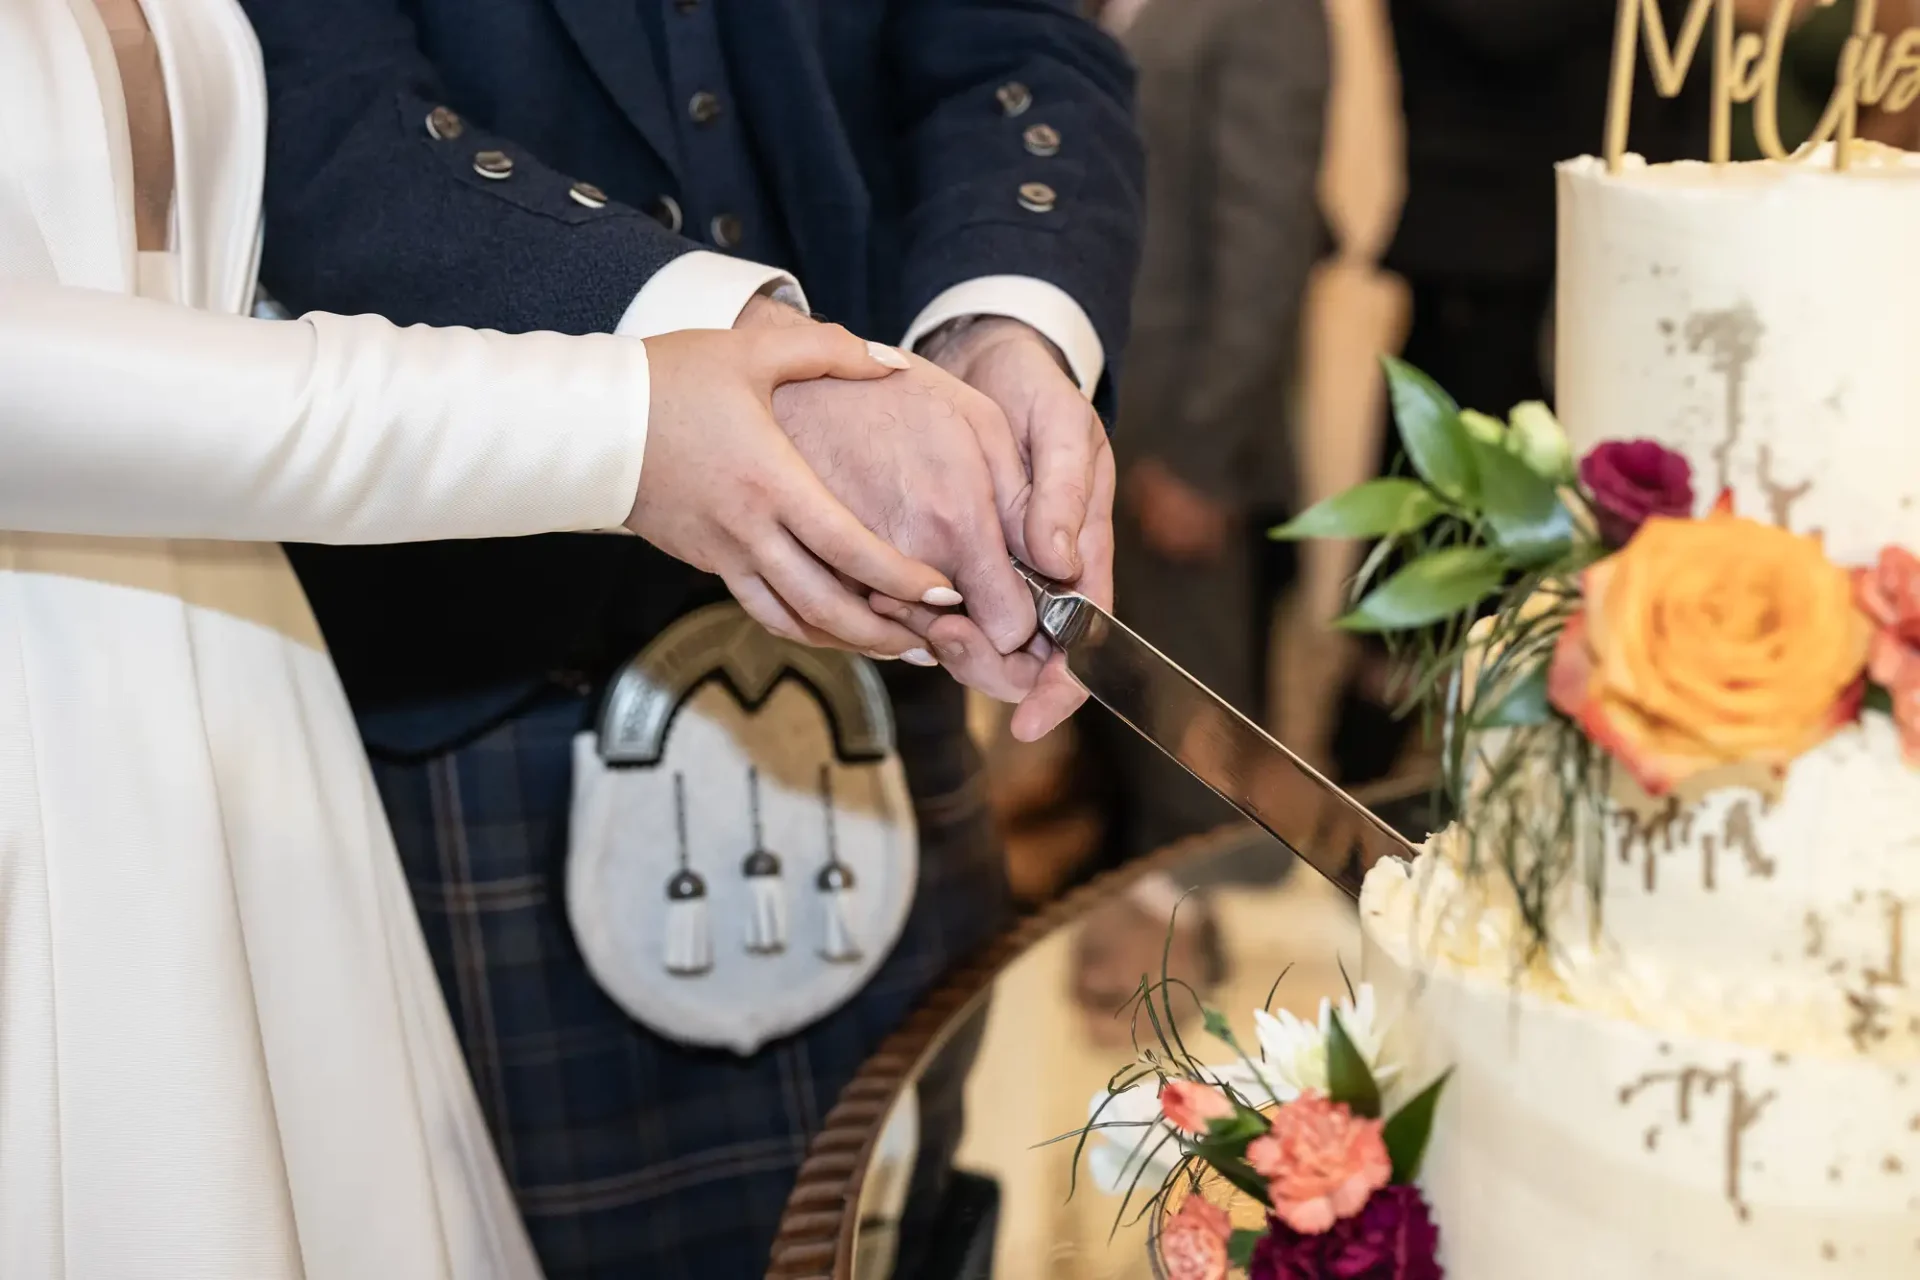 A couple in wedding attire cutting a cake together, with the person on the left in a white dress and the person on the right wearing a kilt.